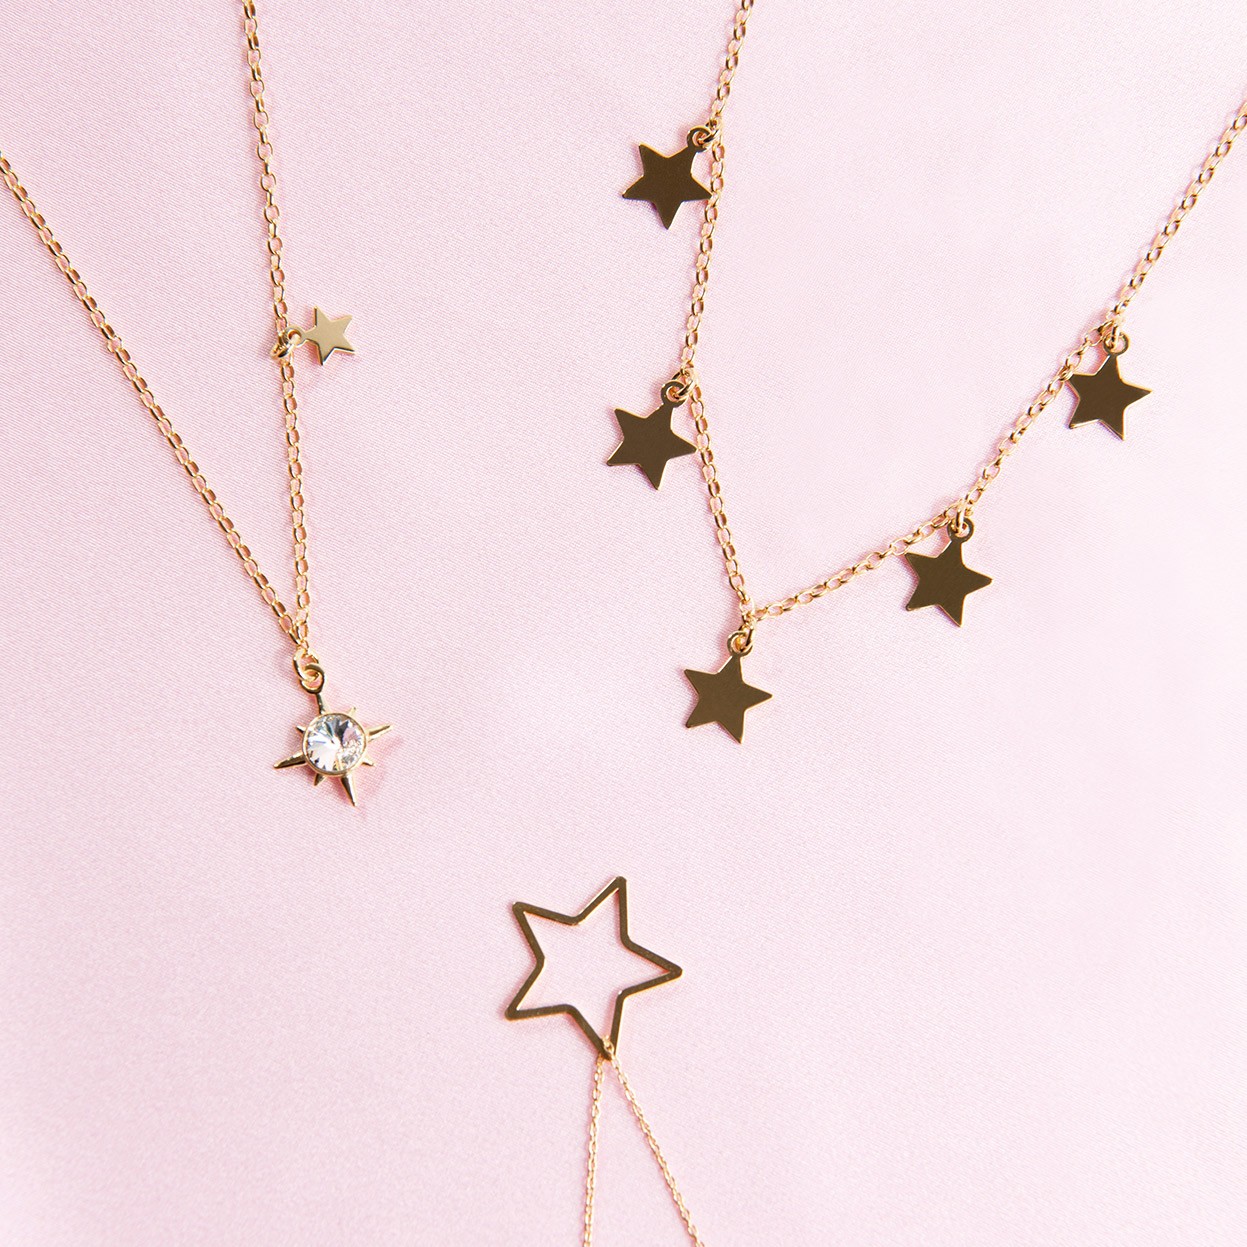 Silver openwork star necklace T°ra'vel'' , silver 925